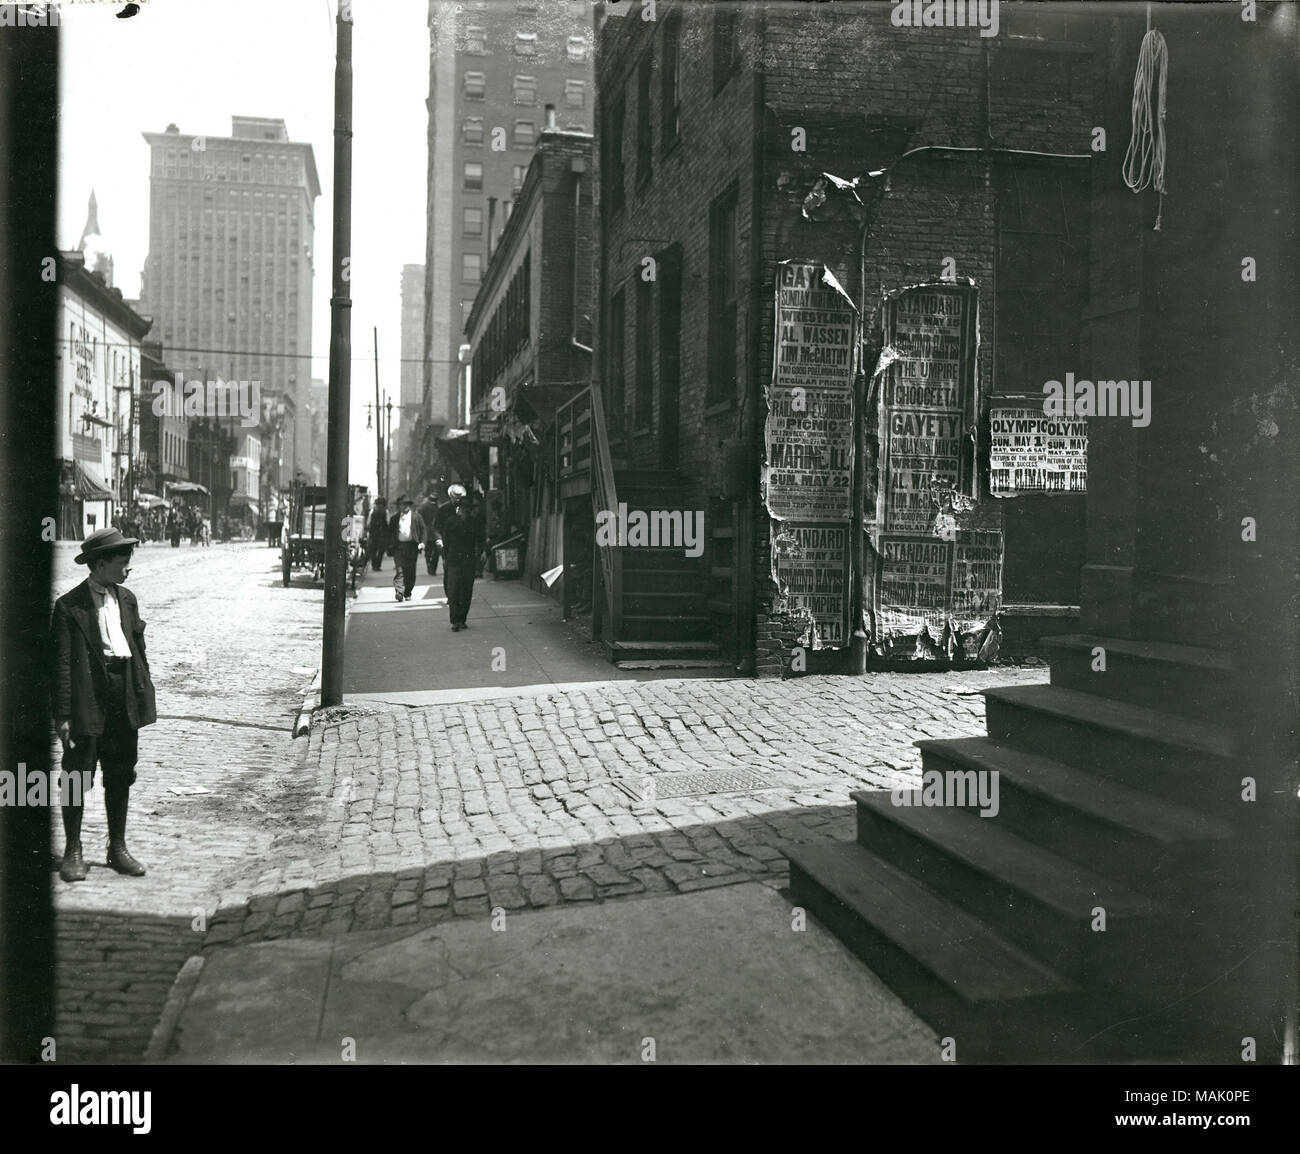 Hop Alley, looking north on Eighth Street between Walnut and Market Streets. Hop Alley was St. Louis' Chinatown. The area developed a colorful and exotic reputation, perhaps because of its proximity to two stretches of seddy bars that ran along Market Street: 'Skid Row,' which was on Market between Eighth and Ninth, and 'Prizefighters' Row,' on Market between Sixth and Seventh Streets. The district was demolished in the 1960s and rebuilt as a parking structure for the new Busch Stadium that opened in 1966. Title: Hop Alley looking north on Eighth Street between Walnut and Market Streets.  . 19 Stock Photo